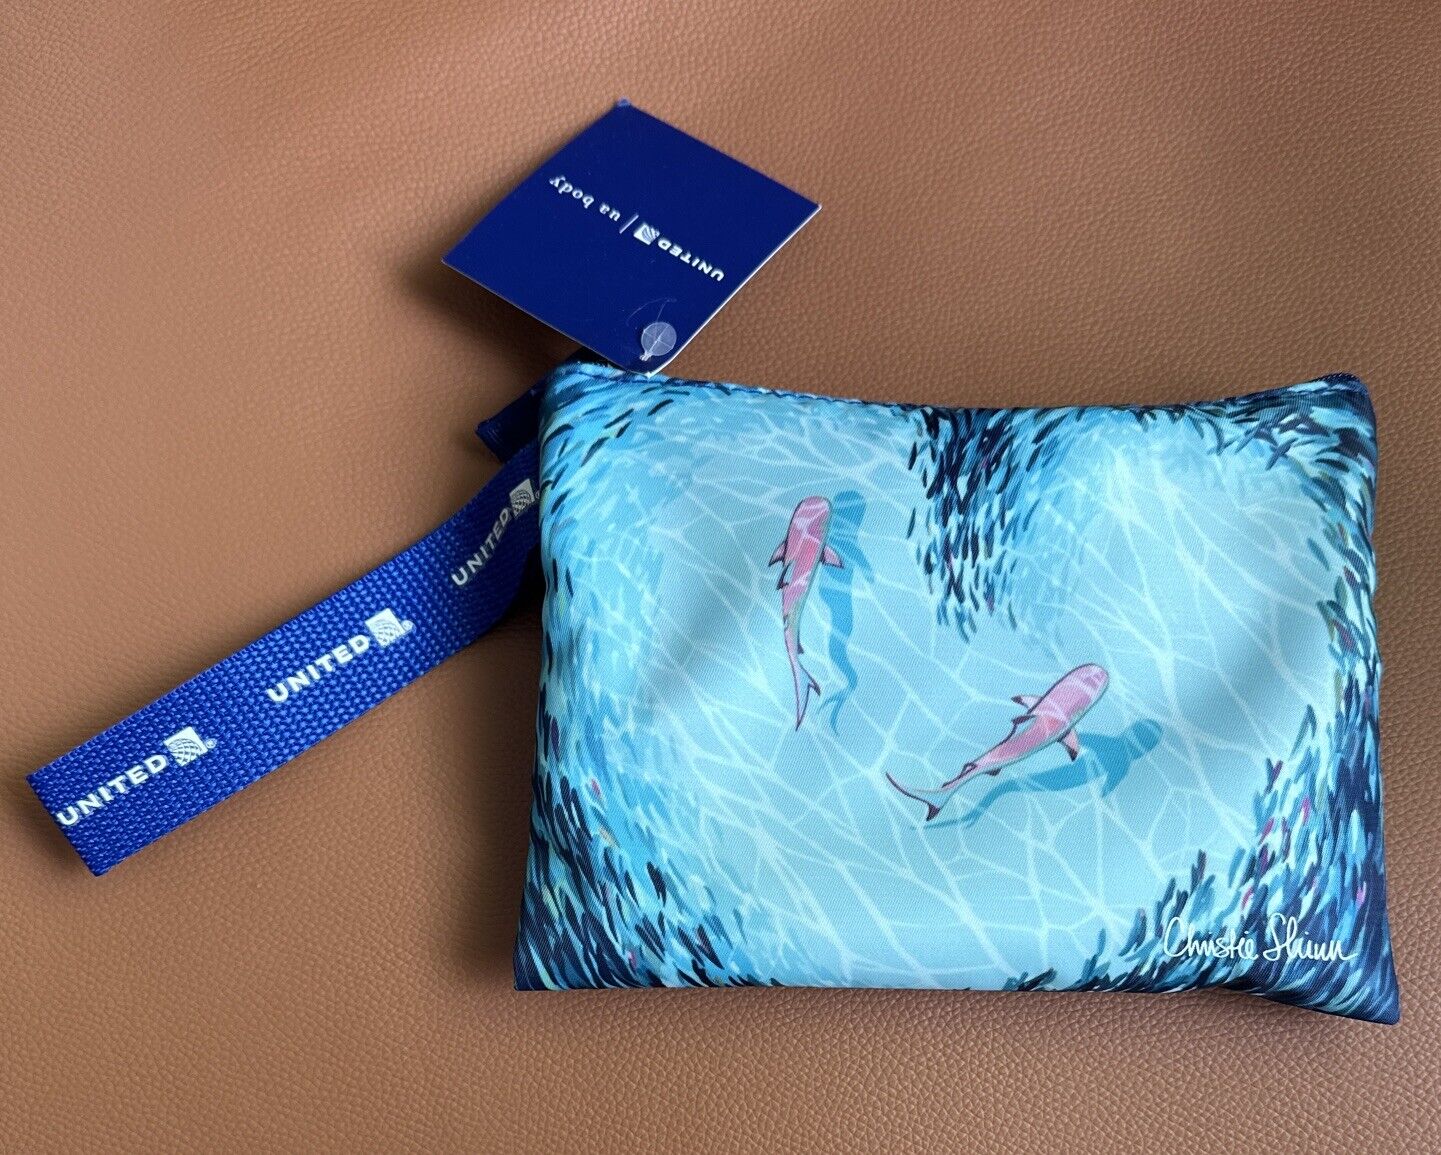 United Airlines Limited Edition Hawaii Amenity Kit